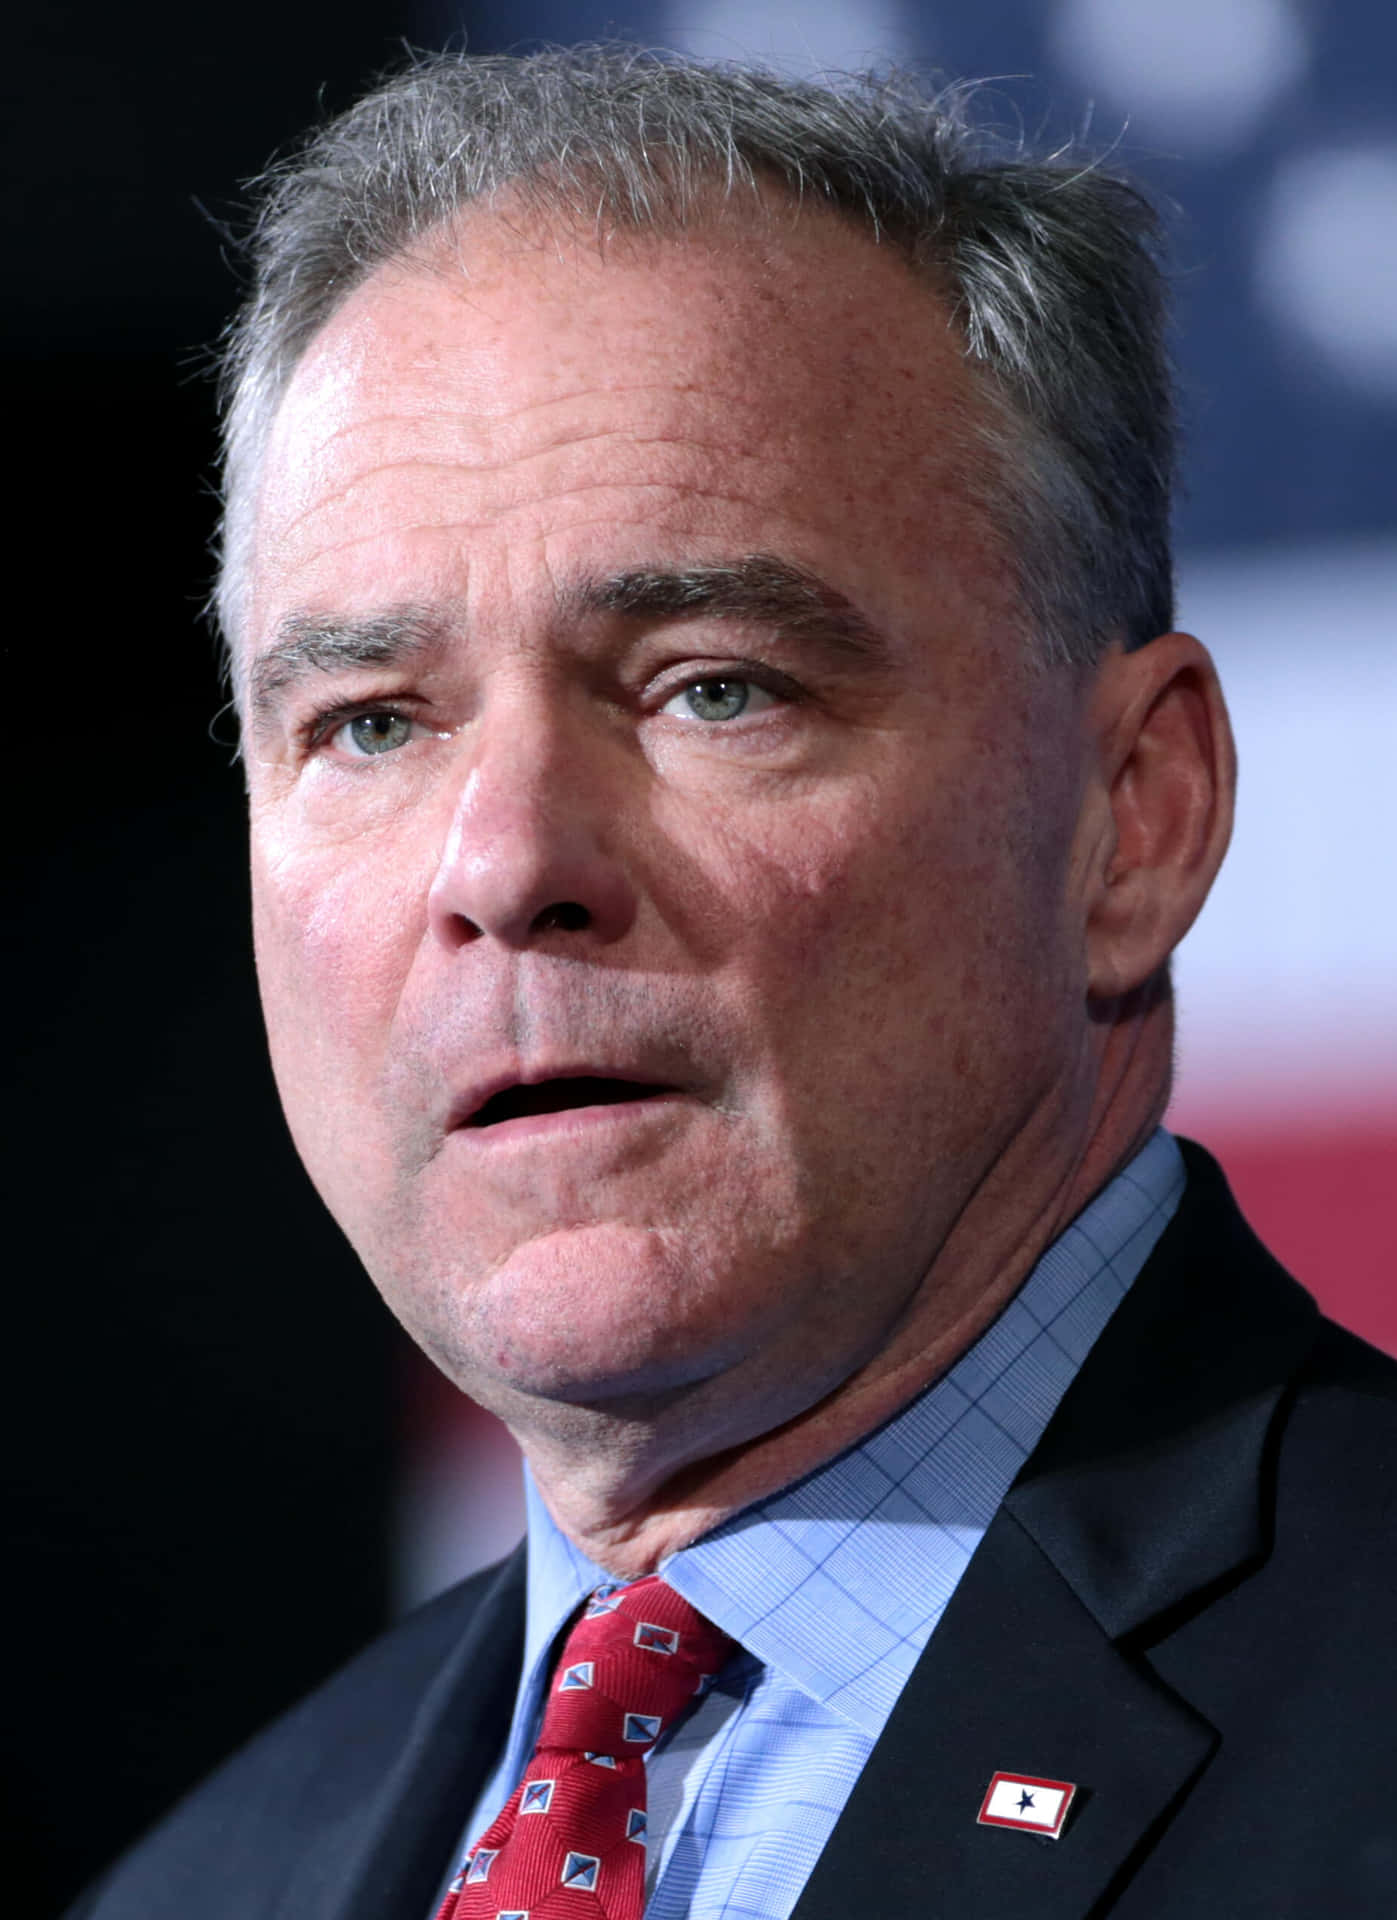 Tim Kaine With Gaping Mouth Wallpaper